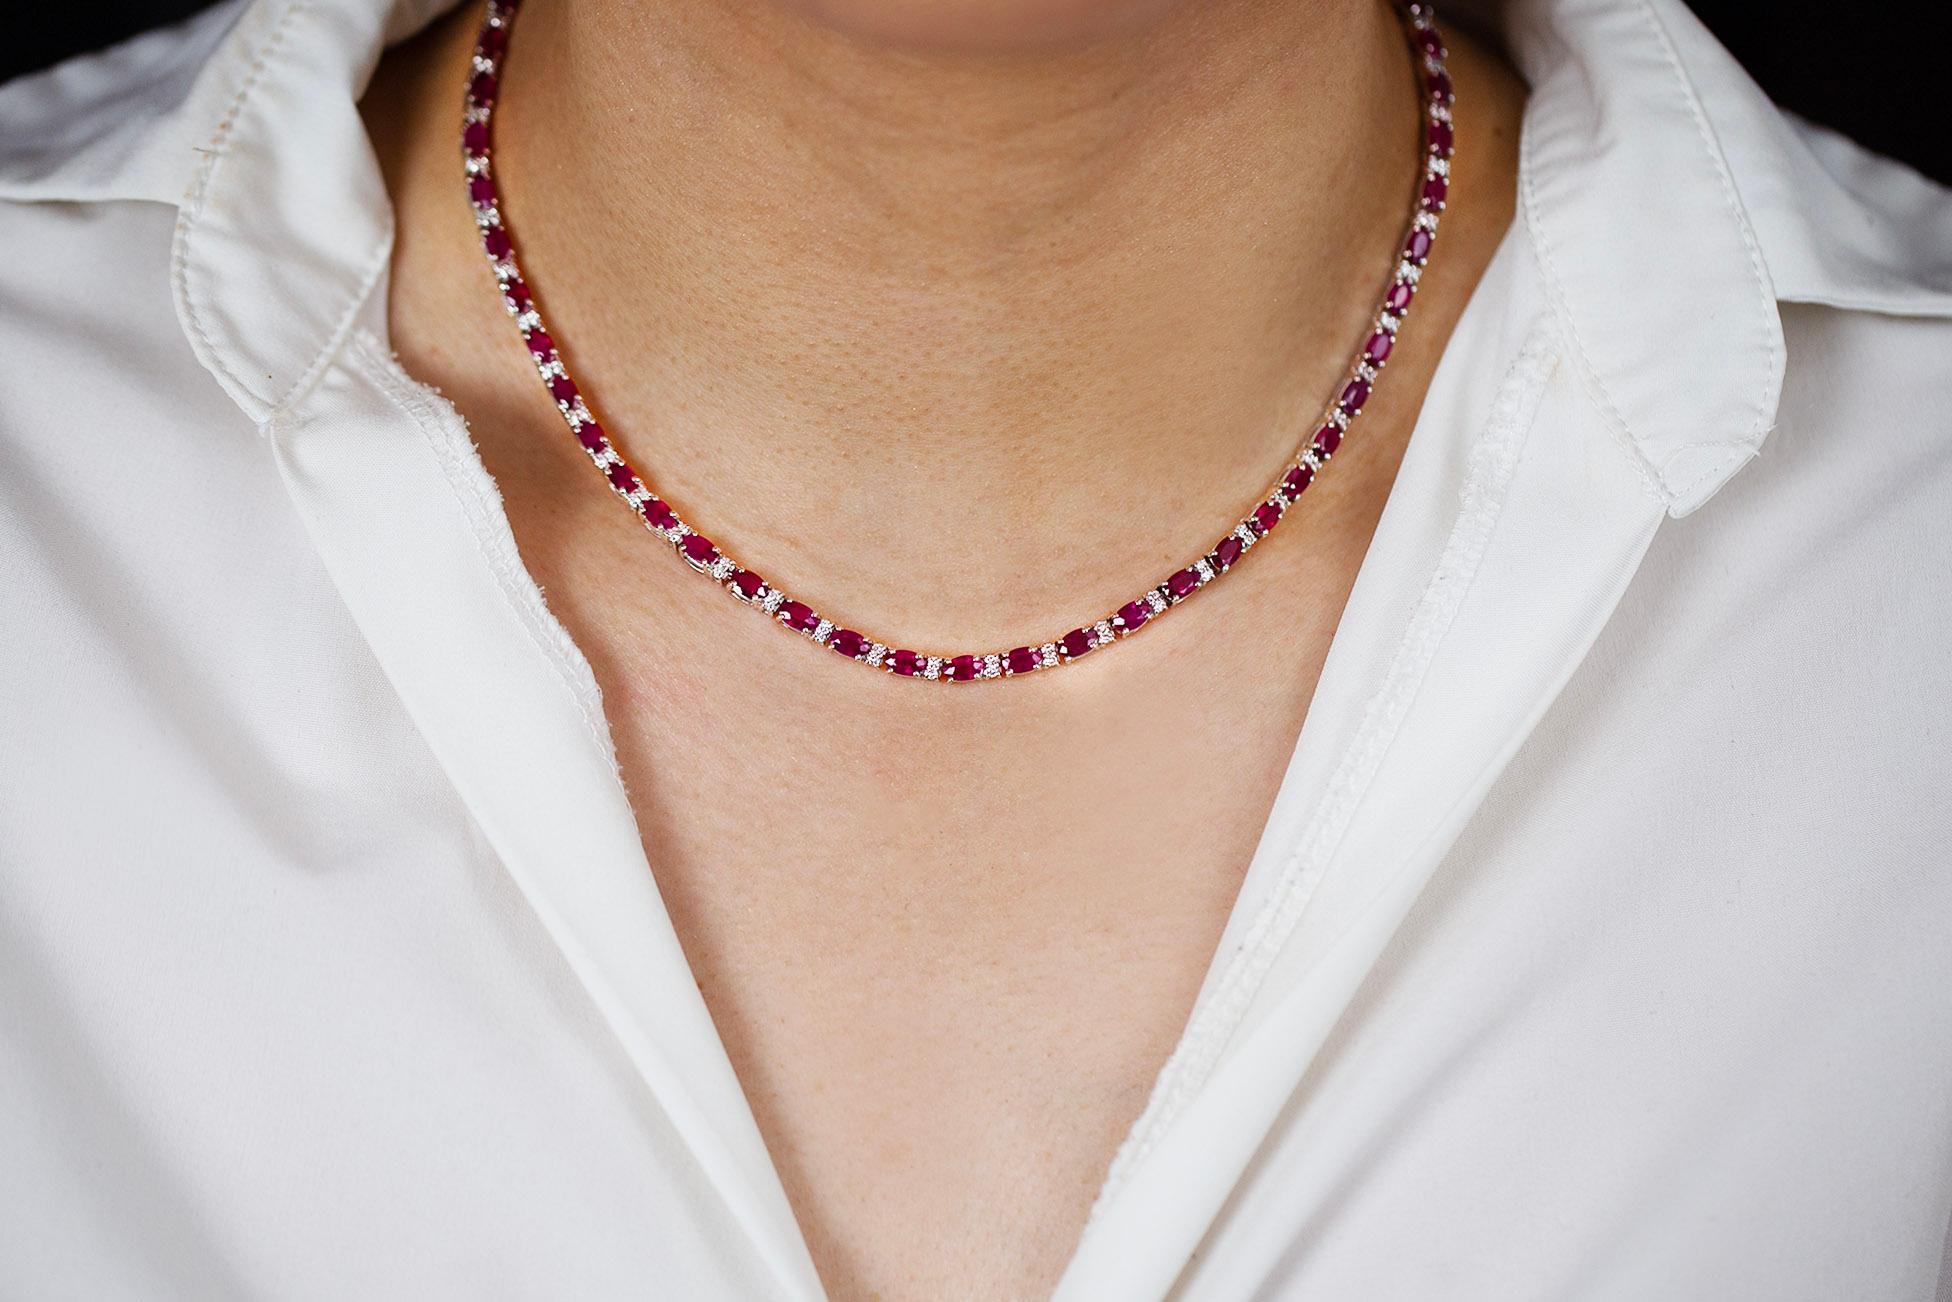 Contemporary Roman Malakov 16.89 Carats Total Oval Cut Ruby and Diamond Tennis Necklace For Sale